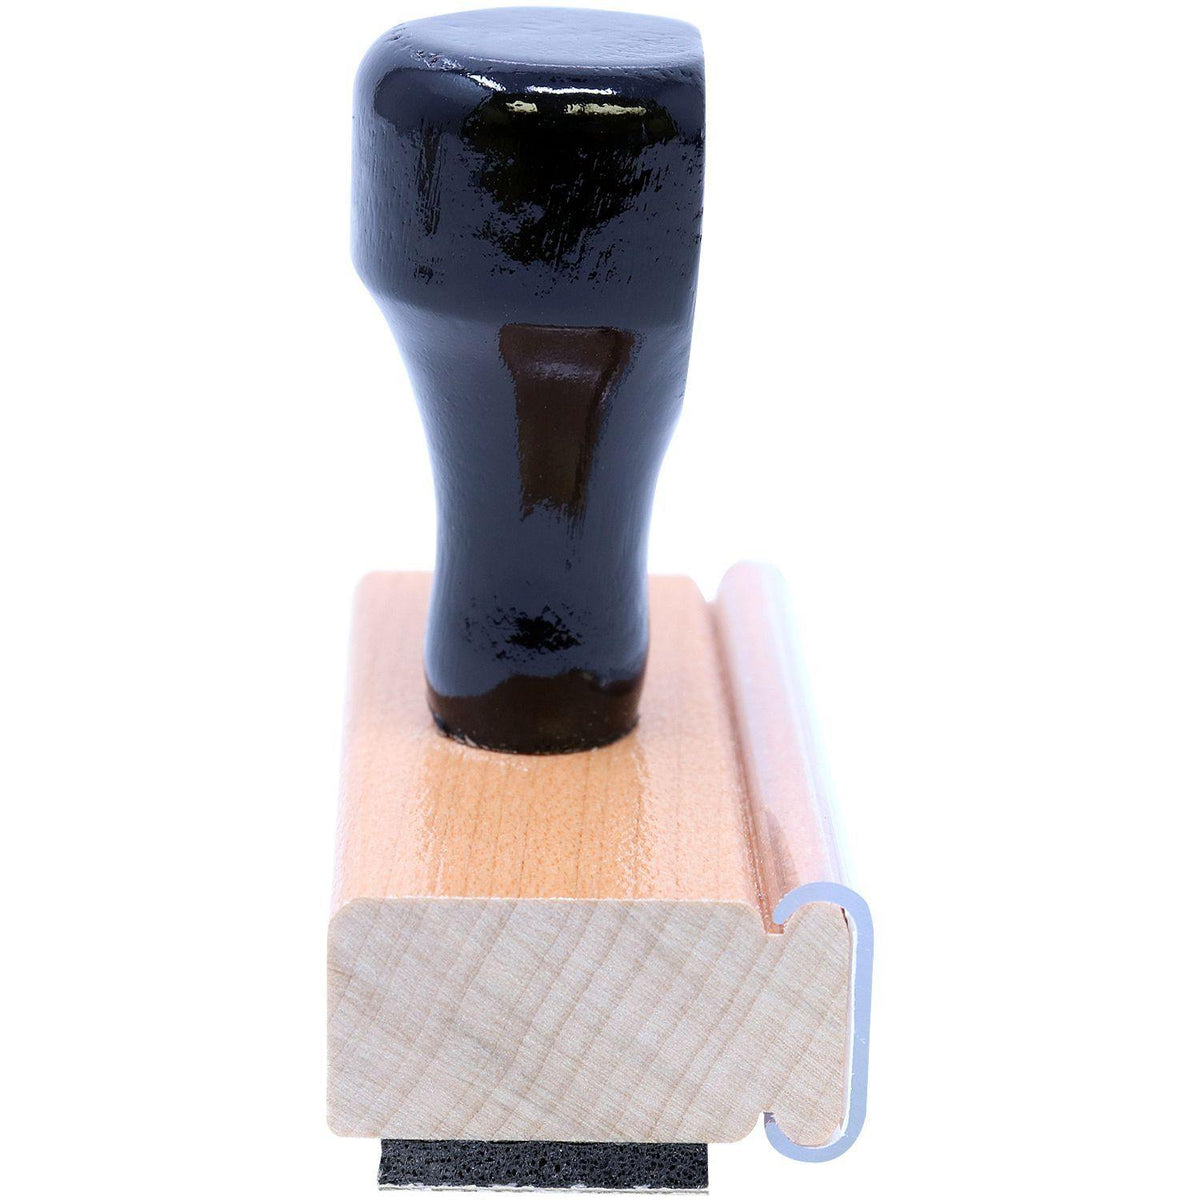 Large Special Funds Rubber Stamp - Engineer Seal Stamps - Brand_Acorn, Impression Size_Large, Stamp Type_Regular Stamp, Type of Use_Business, Type of Use_Finance